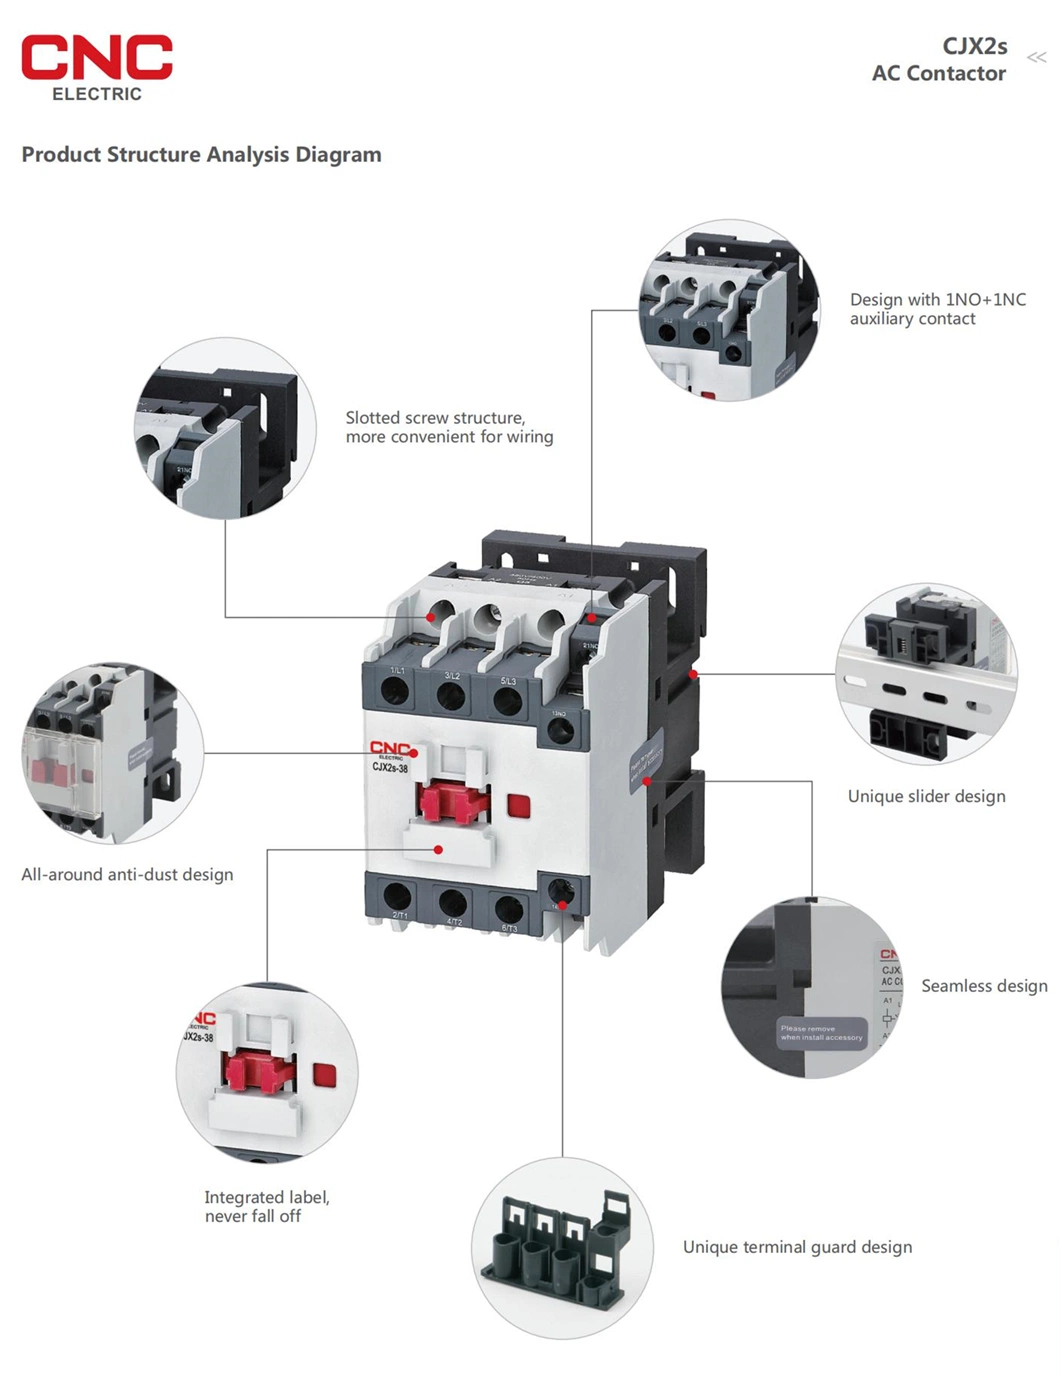 Manufacture 220V - 690V 9A 95A Magnetic Contactor with Overload Protection